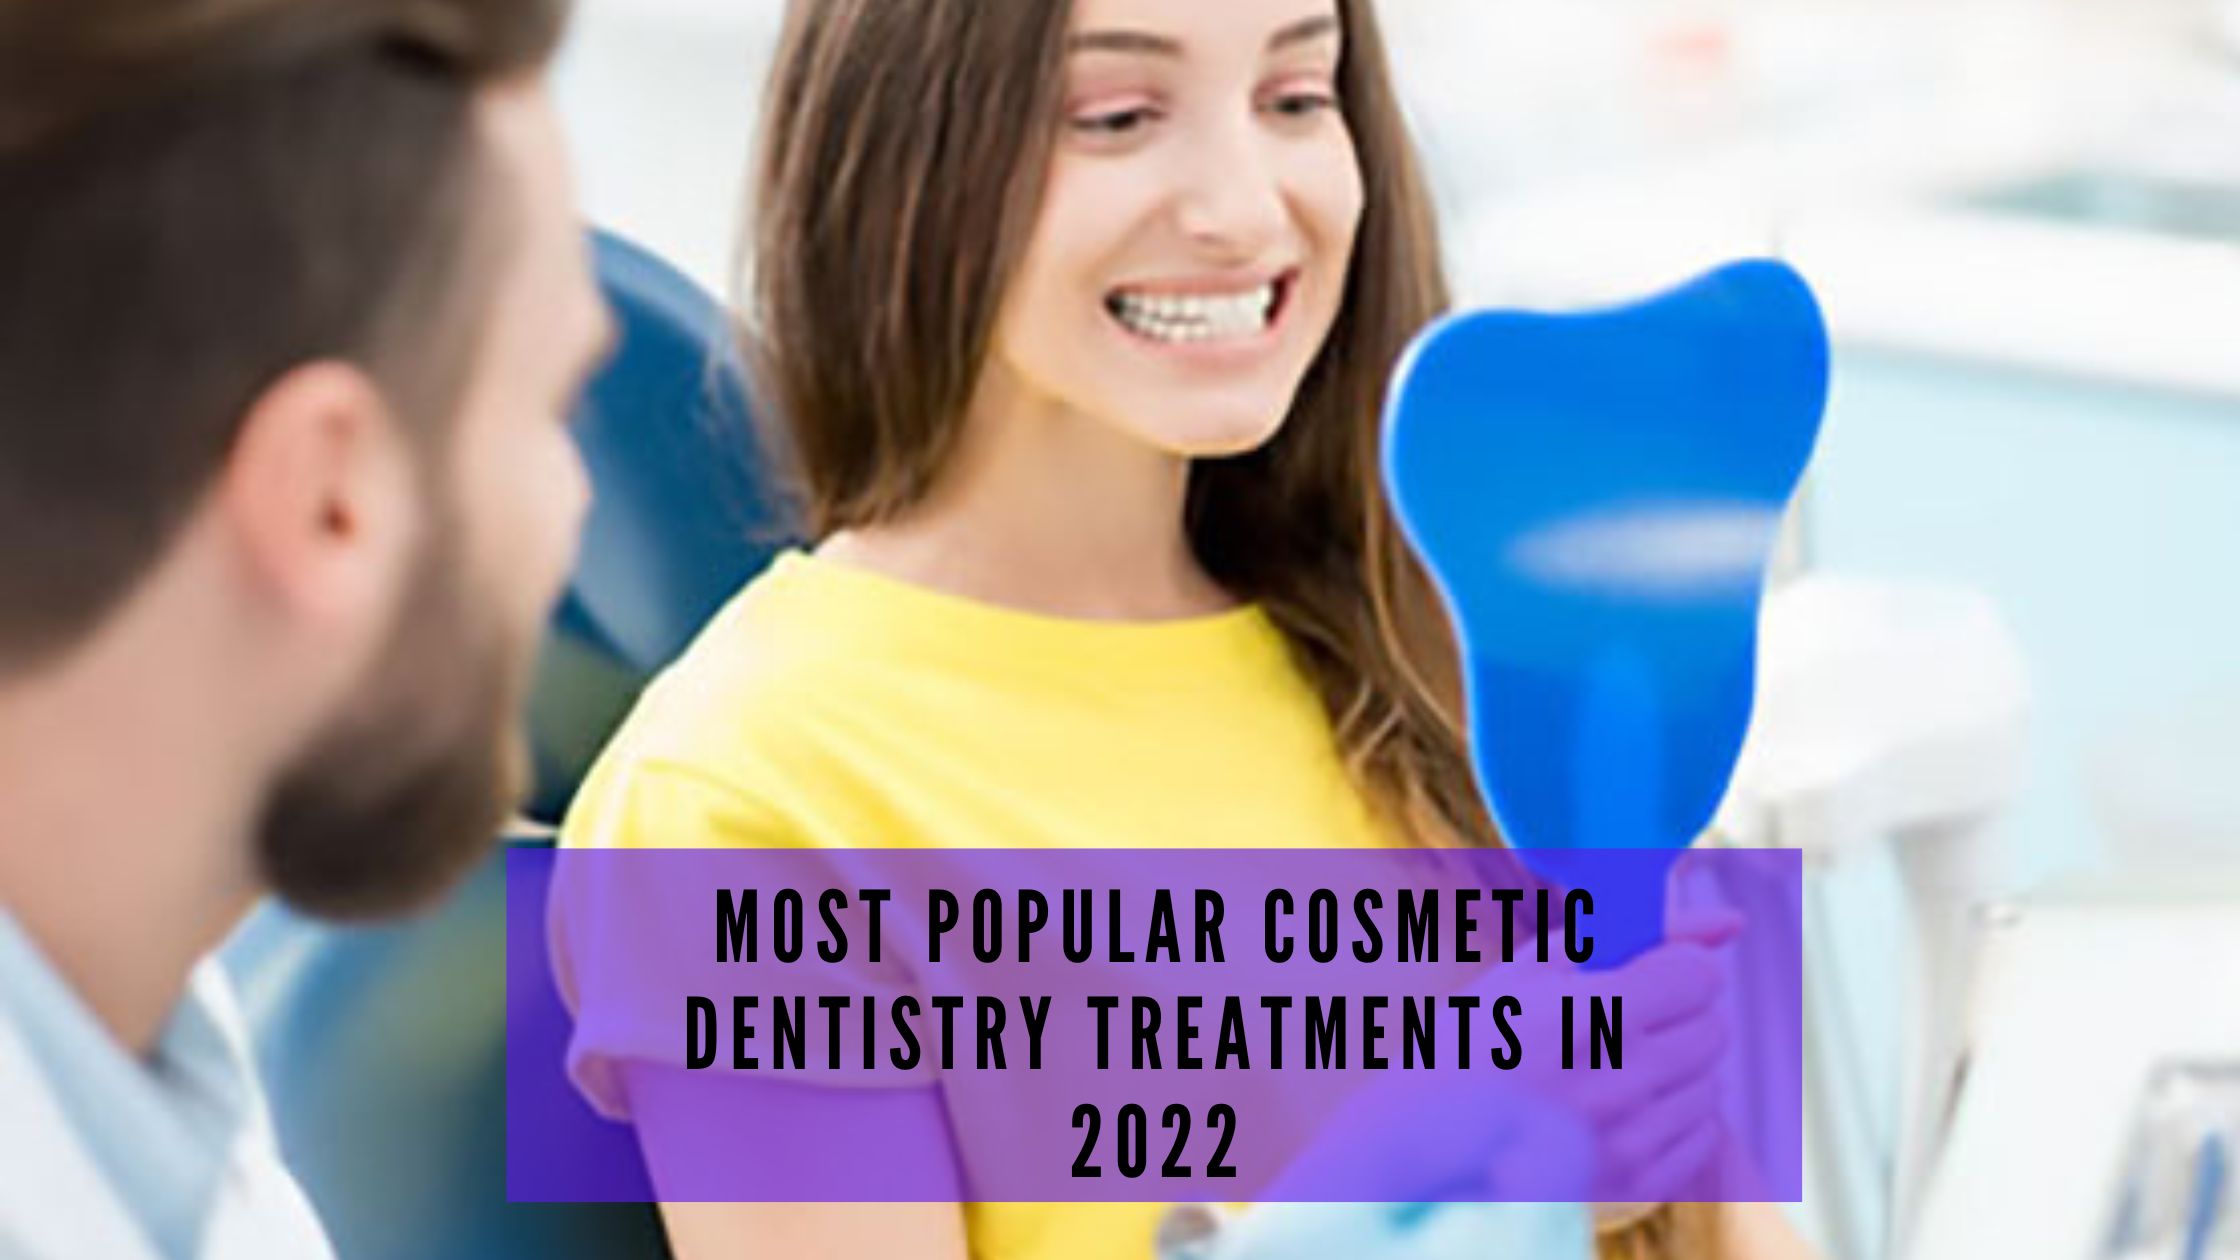 Most Popular Cosmetic Dentistry Treatments in 2022